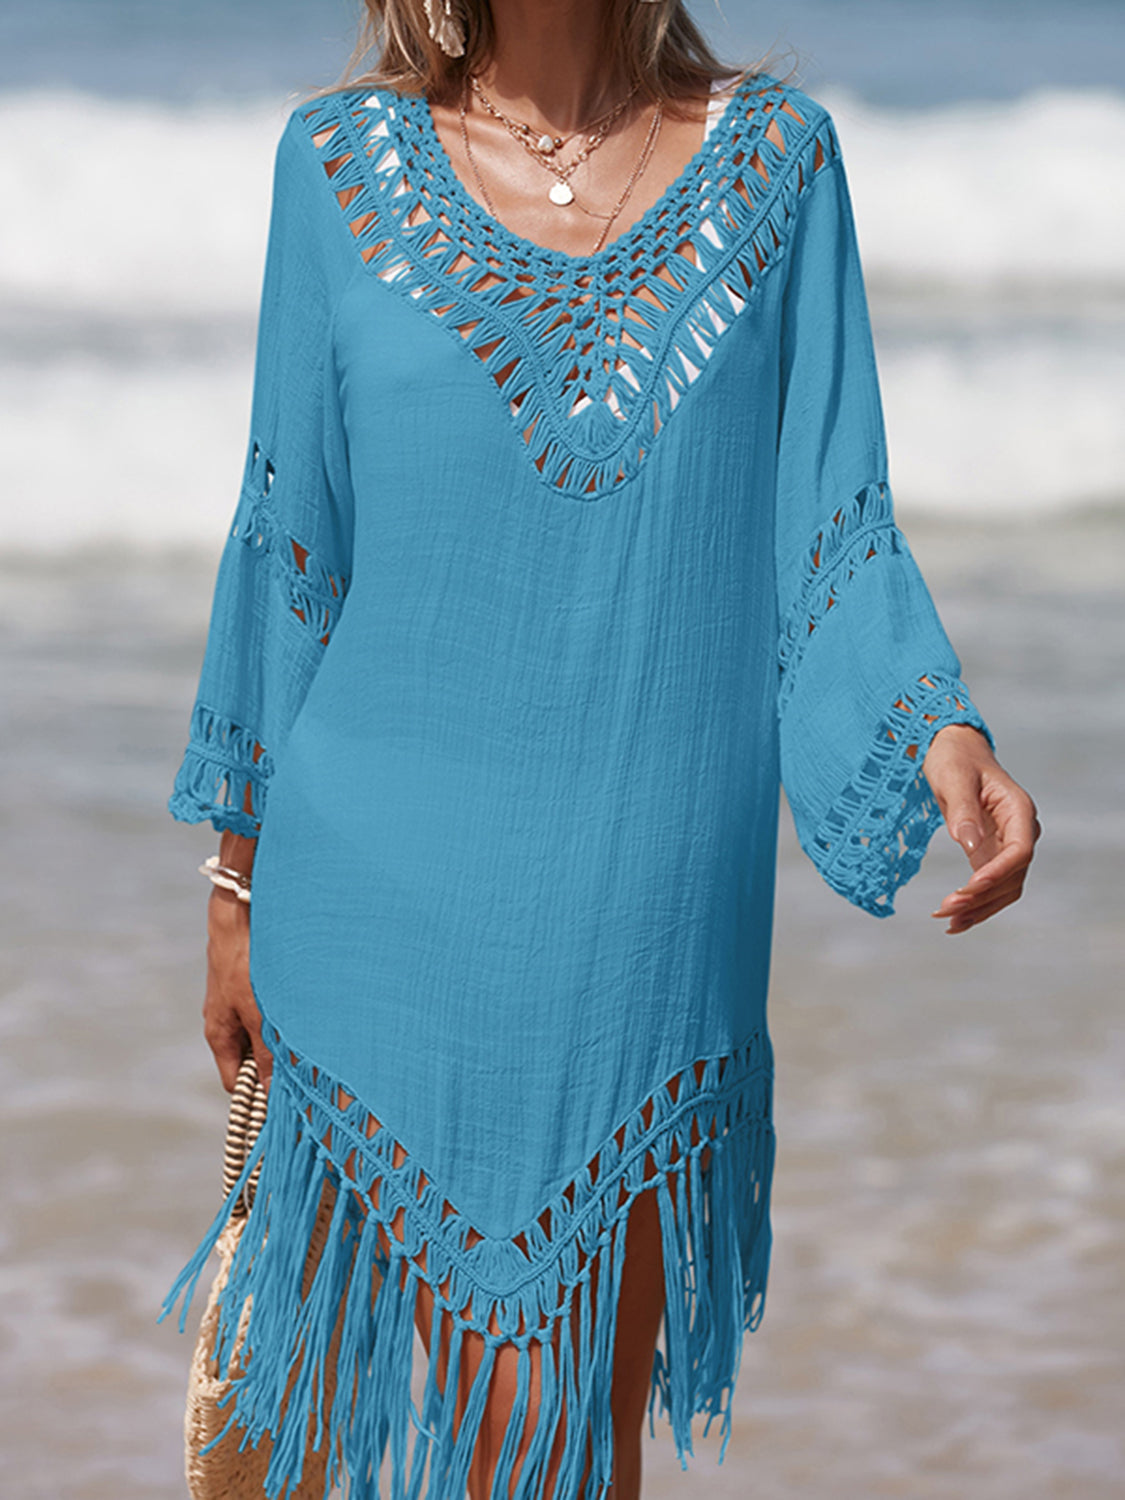 Light Slate Gray Cutout Fringe Scoop Neck Cover-Up Sentient Beauty Fashions Apparel & Accessories